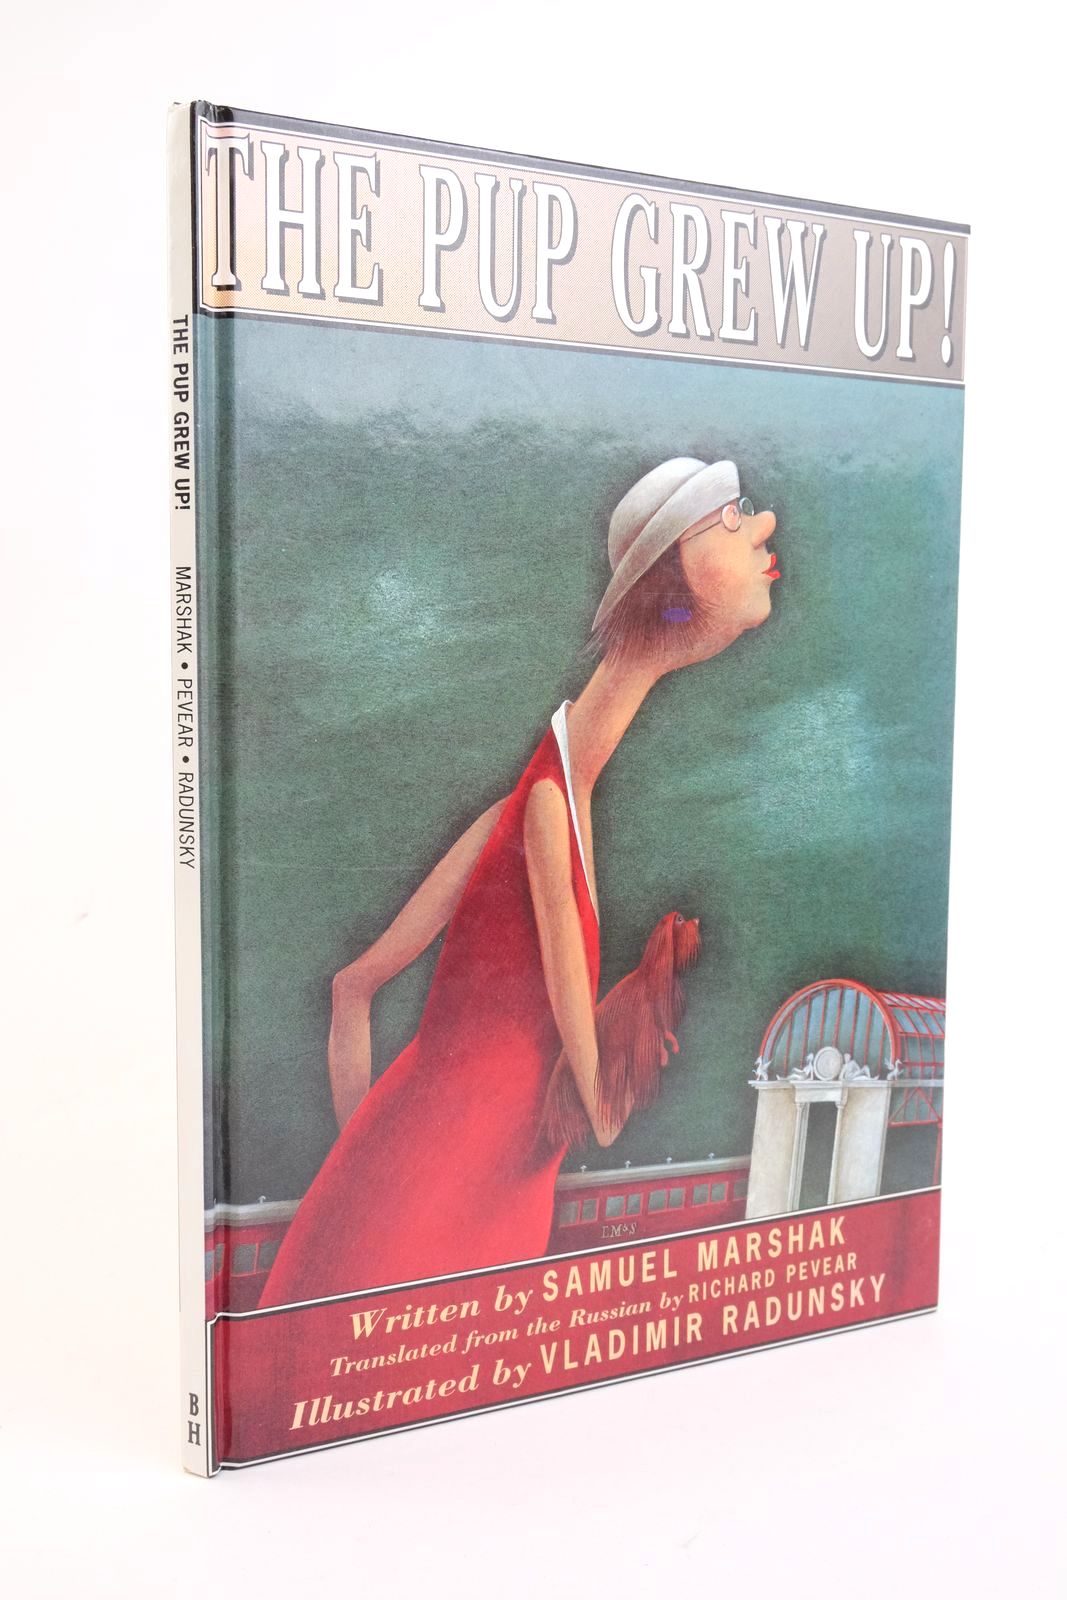 Photo of THE PUP GREW UP! written by Marshak, Samuel
Pevear, Richard illustrated by Radunsky, Vladimir published by The Bodley Head (STOCK CODE: 1322128)  for sale by Stella & Rose's Books